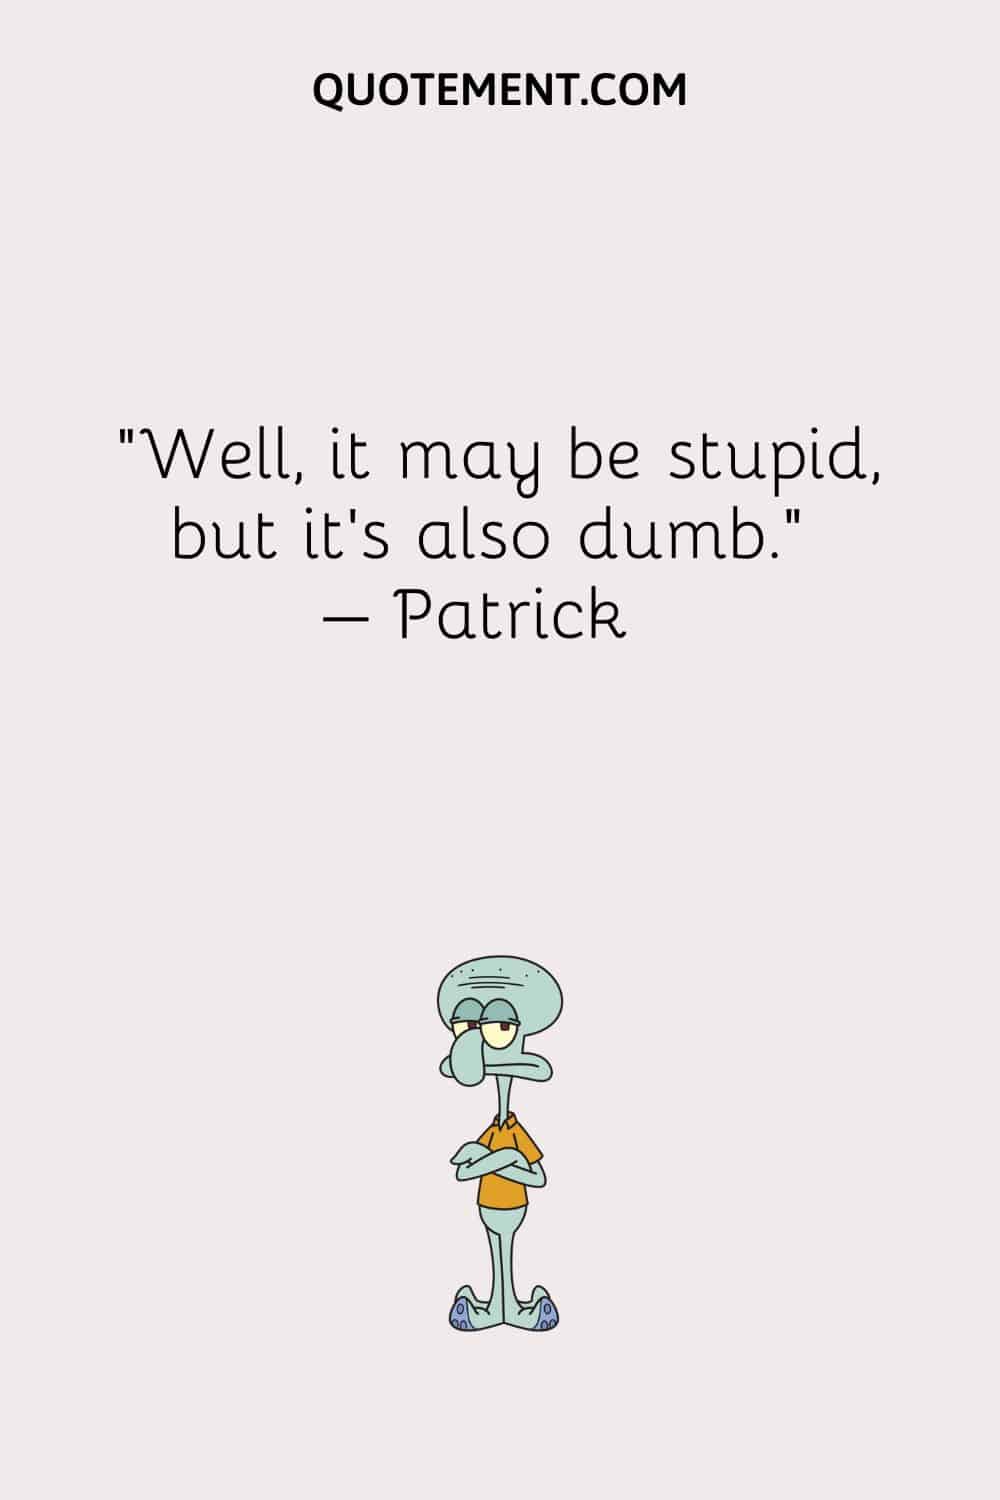 “Well, it may be stupid, but it’s also dumb.” – Patrick